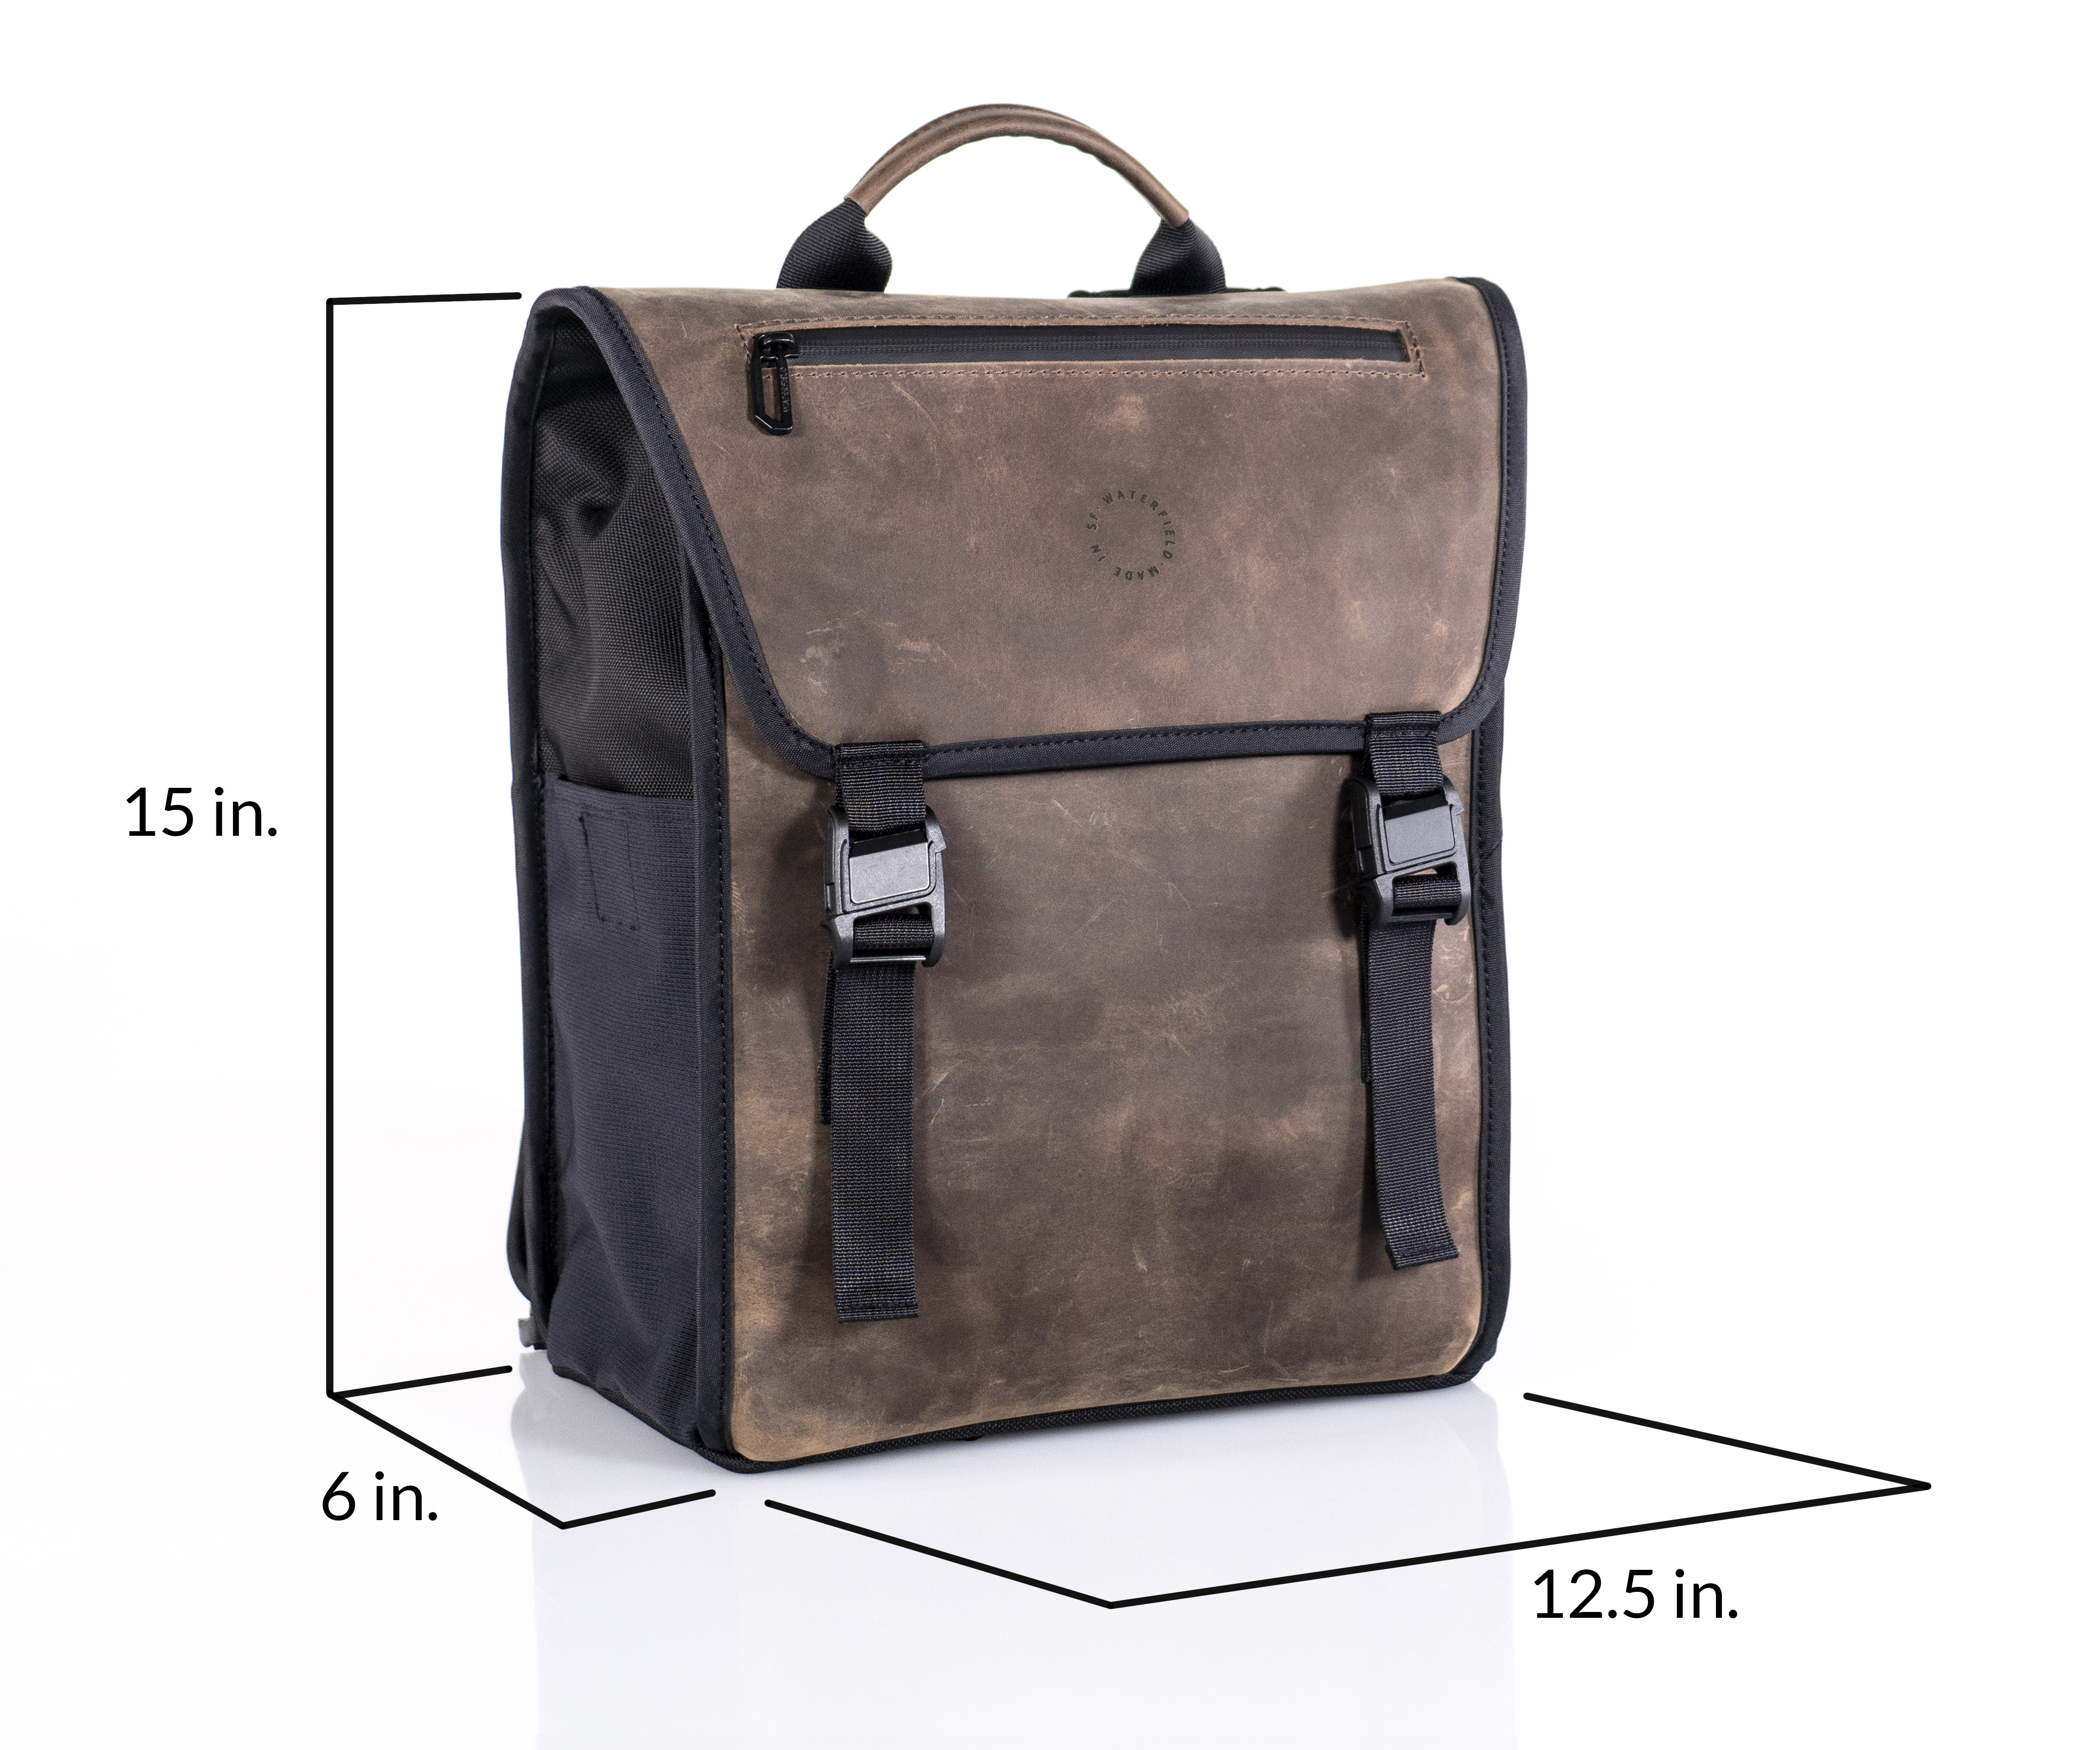 Tuck Backpack Dimensions